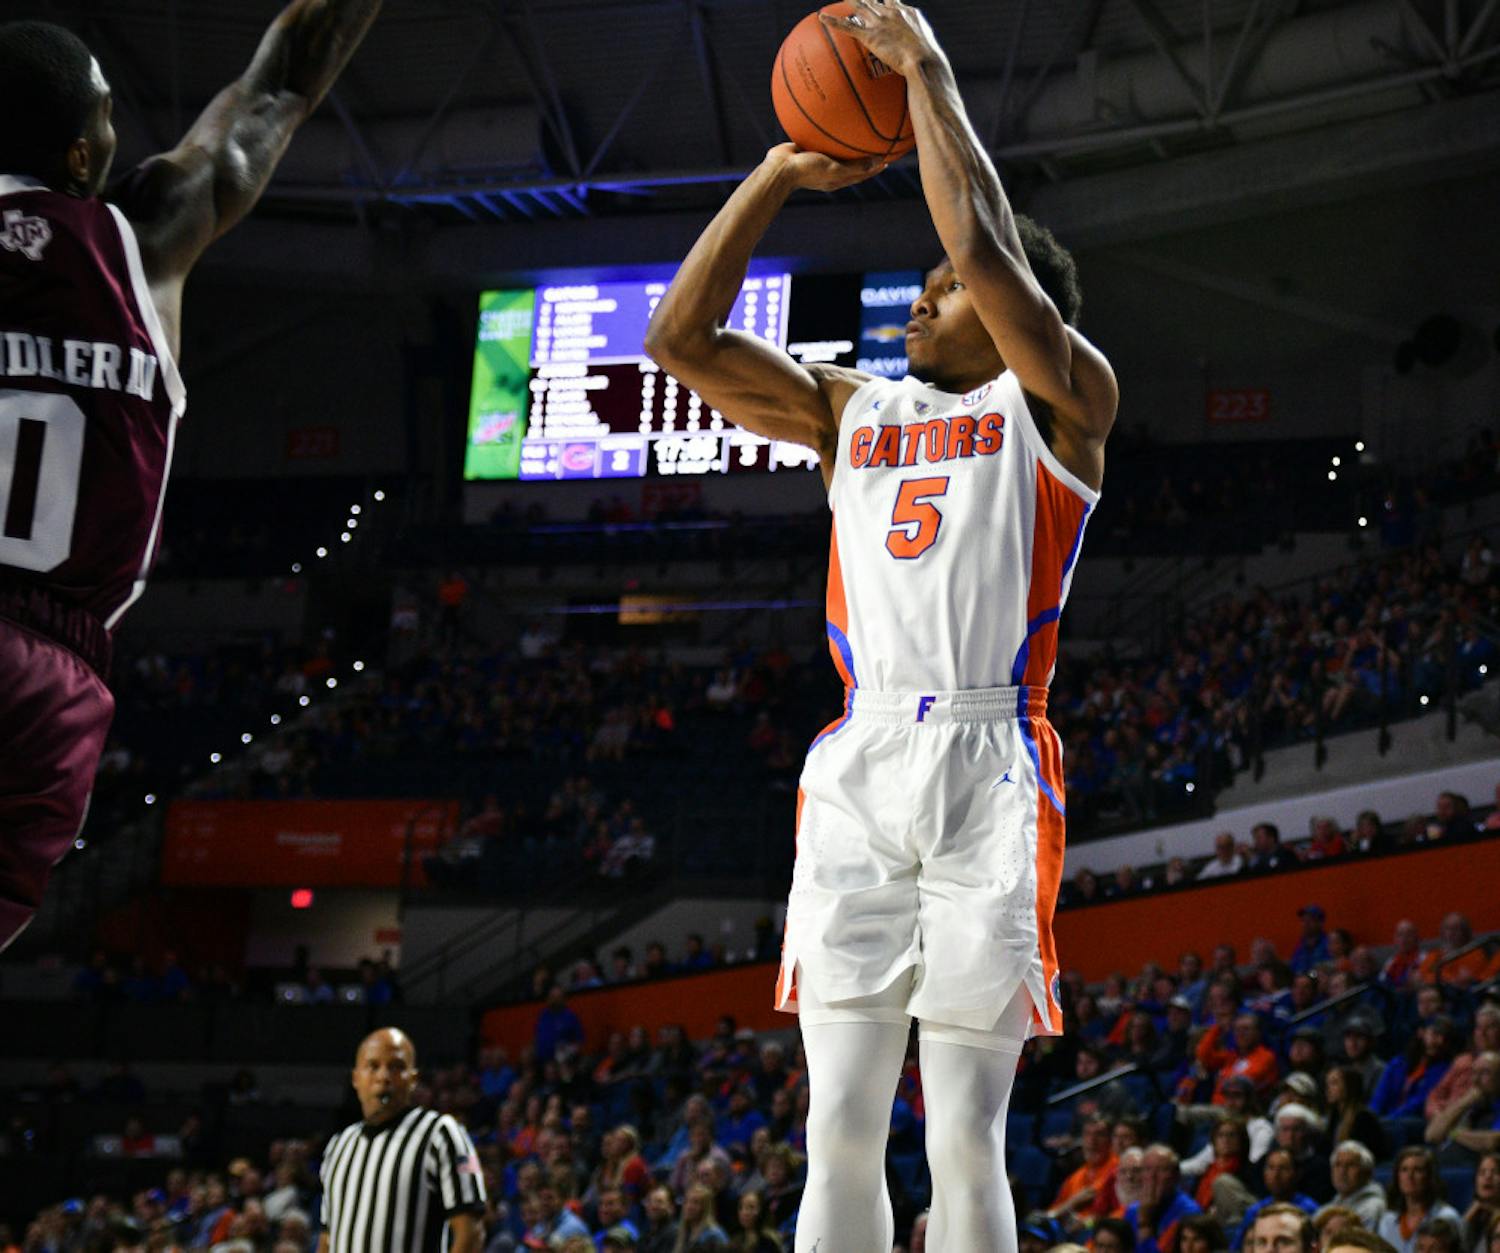 Florida guard KeVaughn Allen became the first Gator this season to eclipse 20 points. He was 10 of 16 on the night, which included 8 of 10 from three, to drop a game-high 31 points against Texas A&amp;M. 